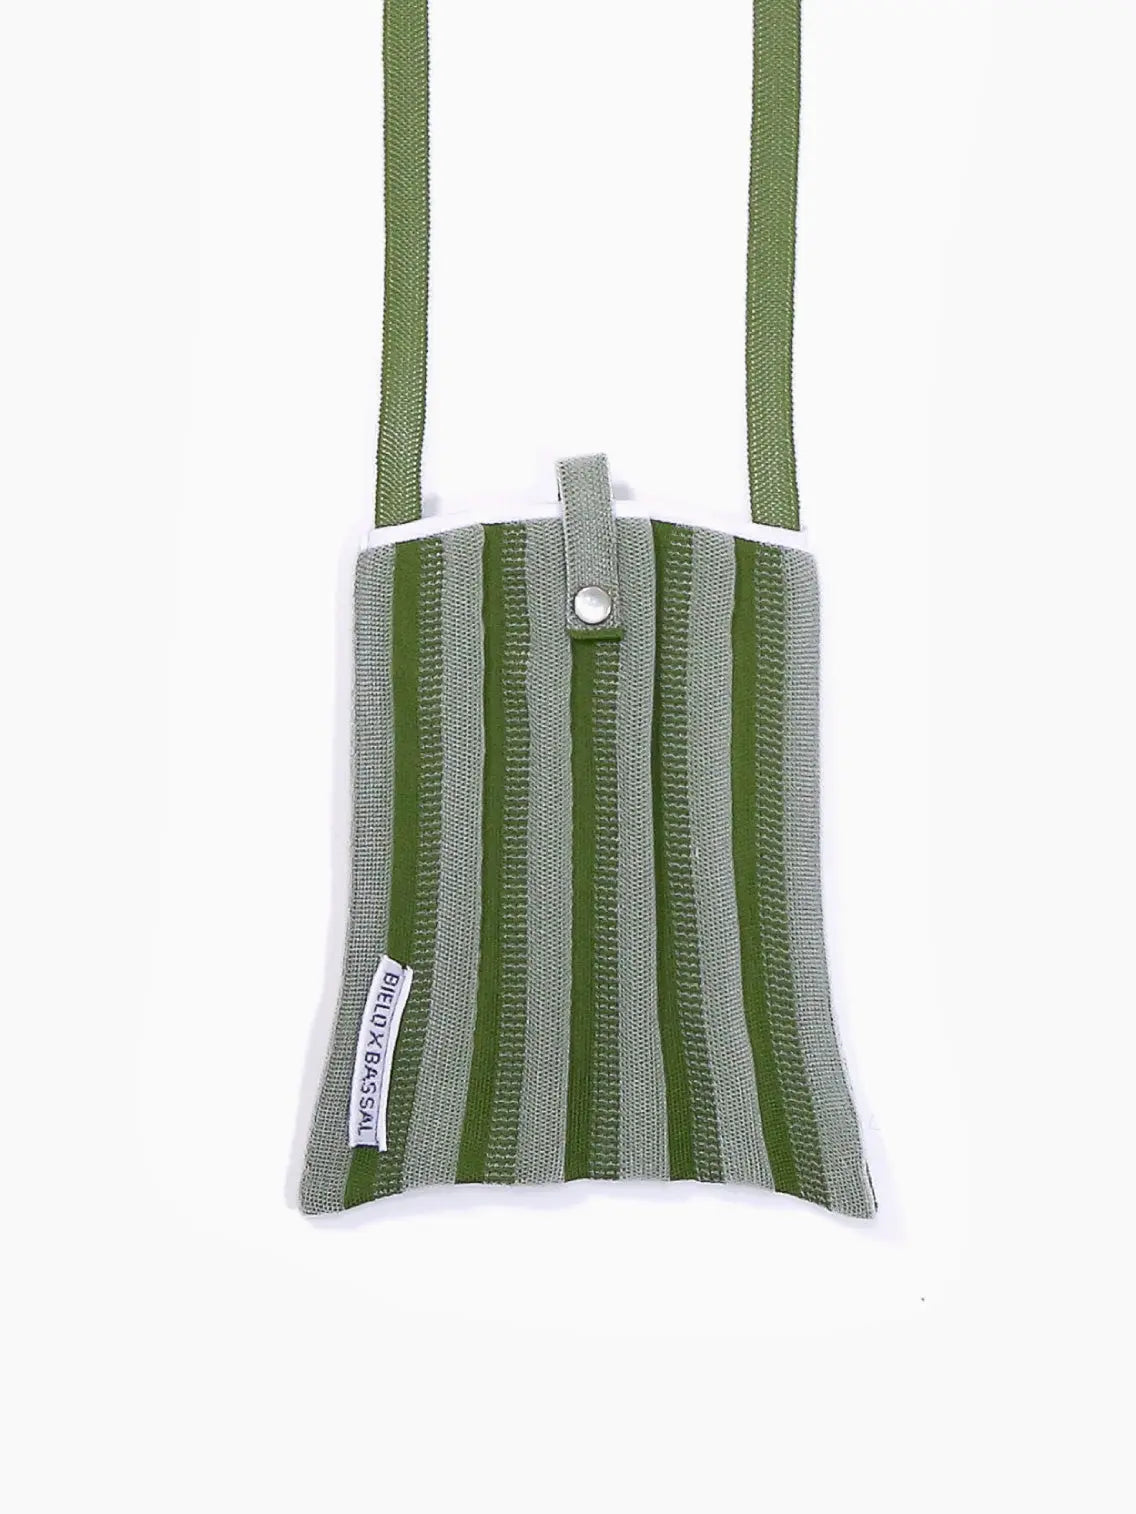 A small green and gray striped fabric bag with a shoulder strap. The Green Shoulder Bag features a snap button closure at the top and a small rectangular label with text on the lower left side. Proudly displayed by Bielo x Bassal Store, this stylish accessory brings a touch of Barcelona charm to your wardrobe against a plain white background.